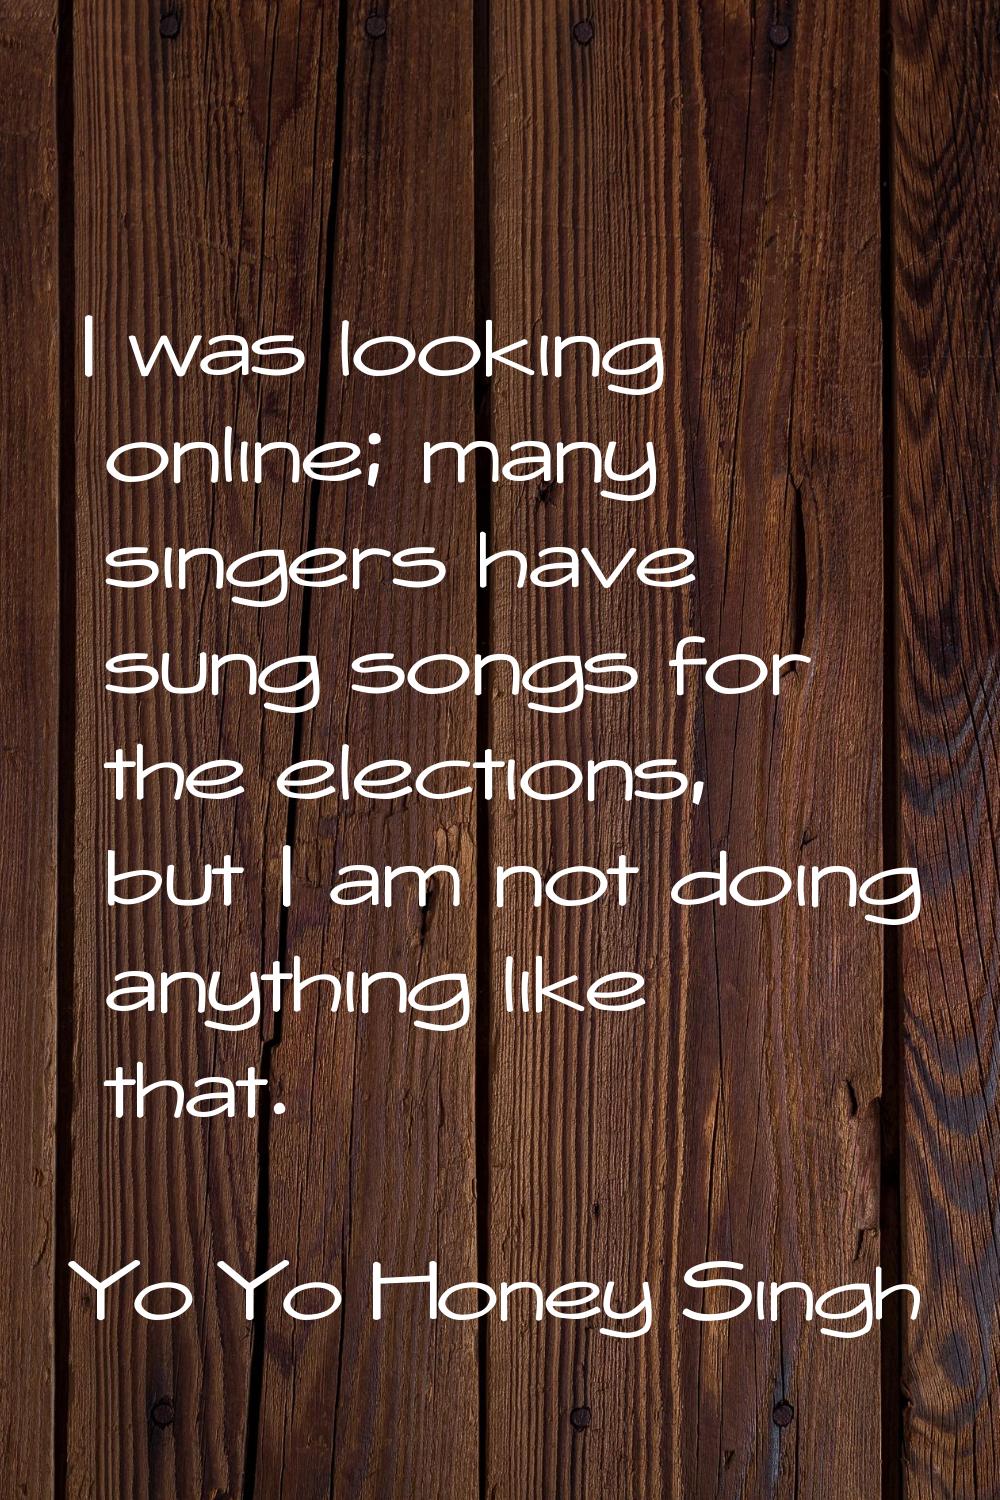 I was looking online; many singers have sung songs for the elections, but I am not doing anything l